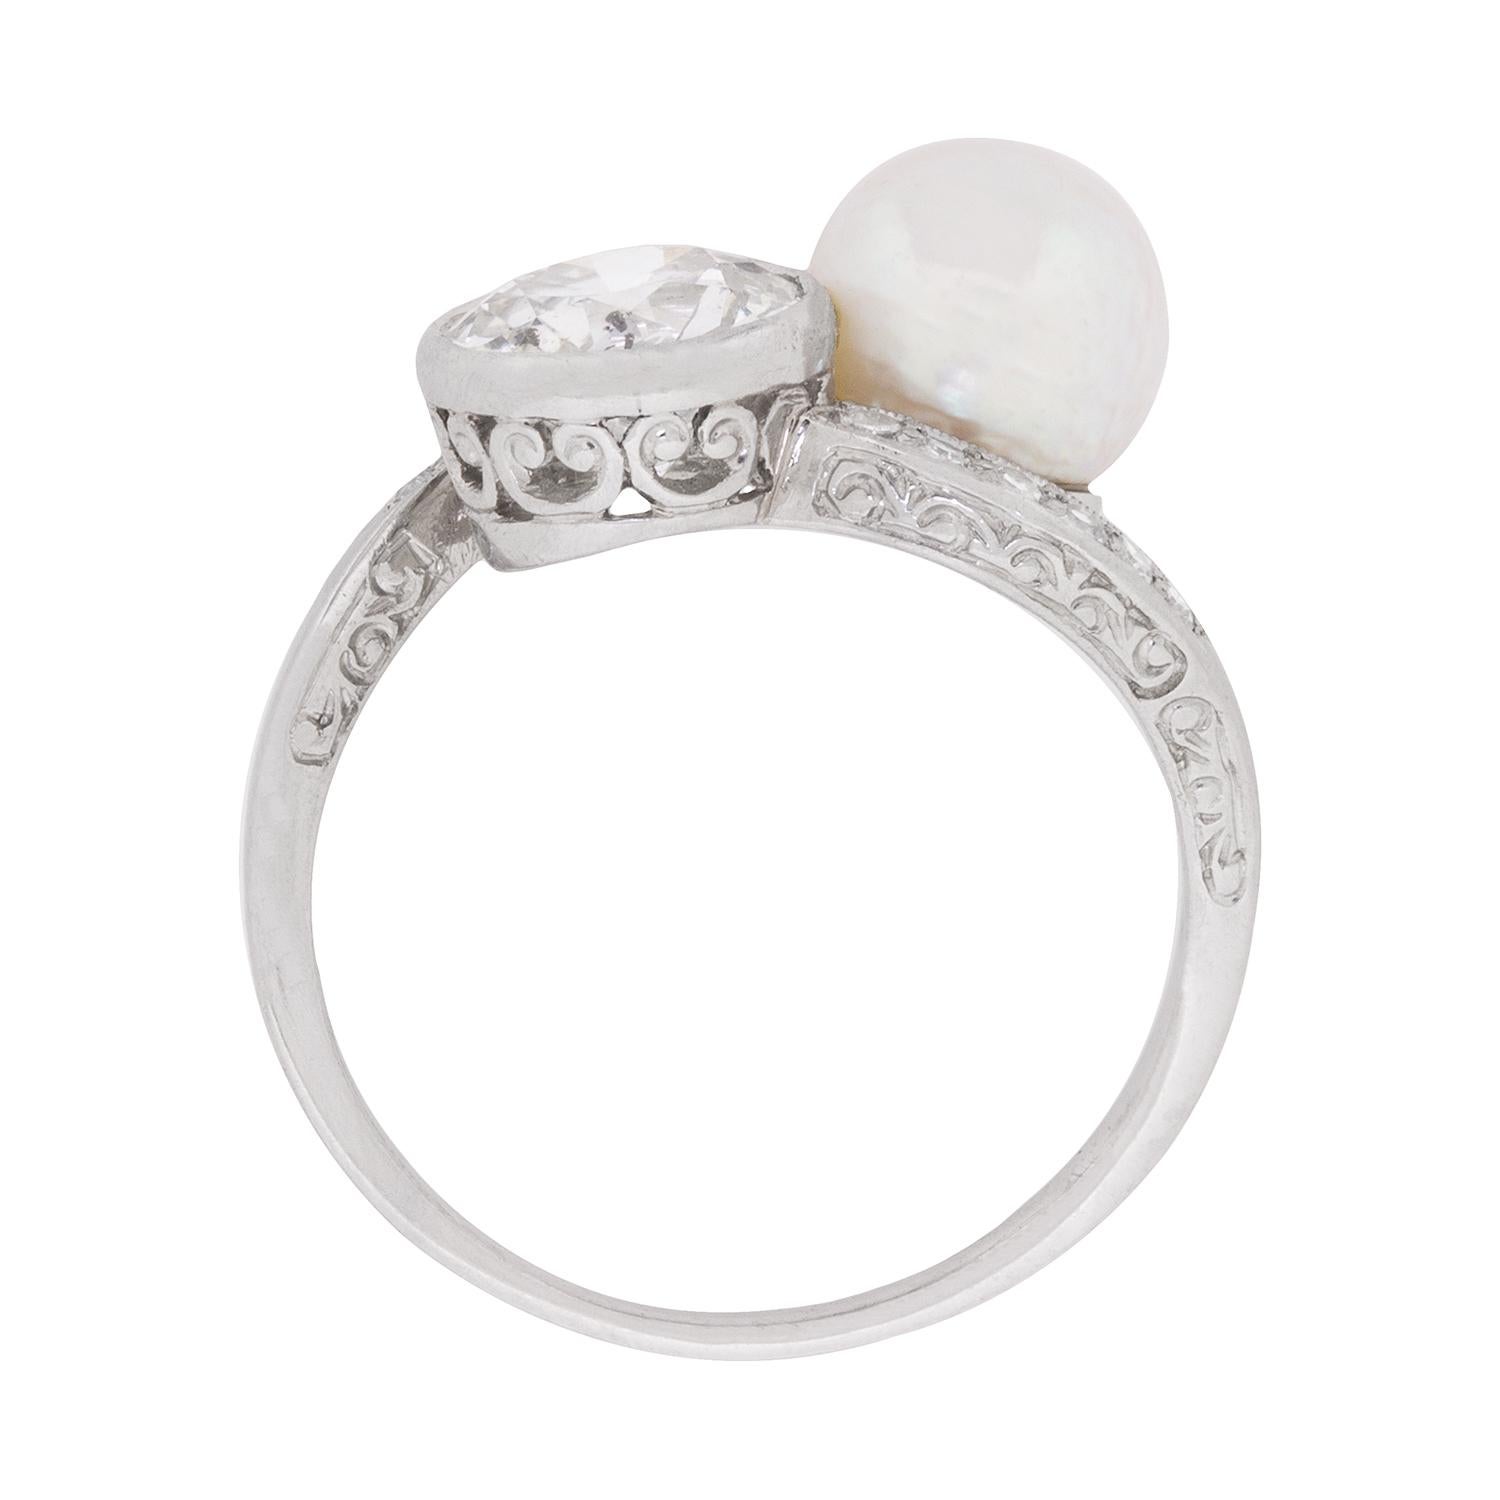 This wonderful ring features the unique combination of diamonds and a stunning pearl measuring 7.65mm in diameter. The pearl has been certified by an independent certification company, The Gem and Pearl Lab in London, as natural and saltwater pearl.